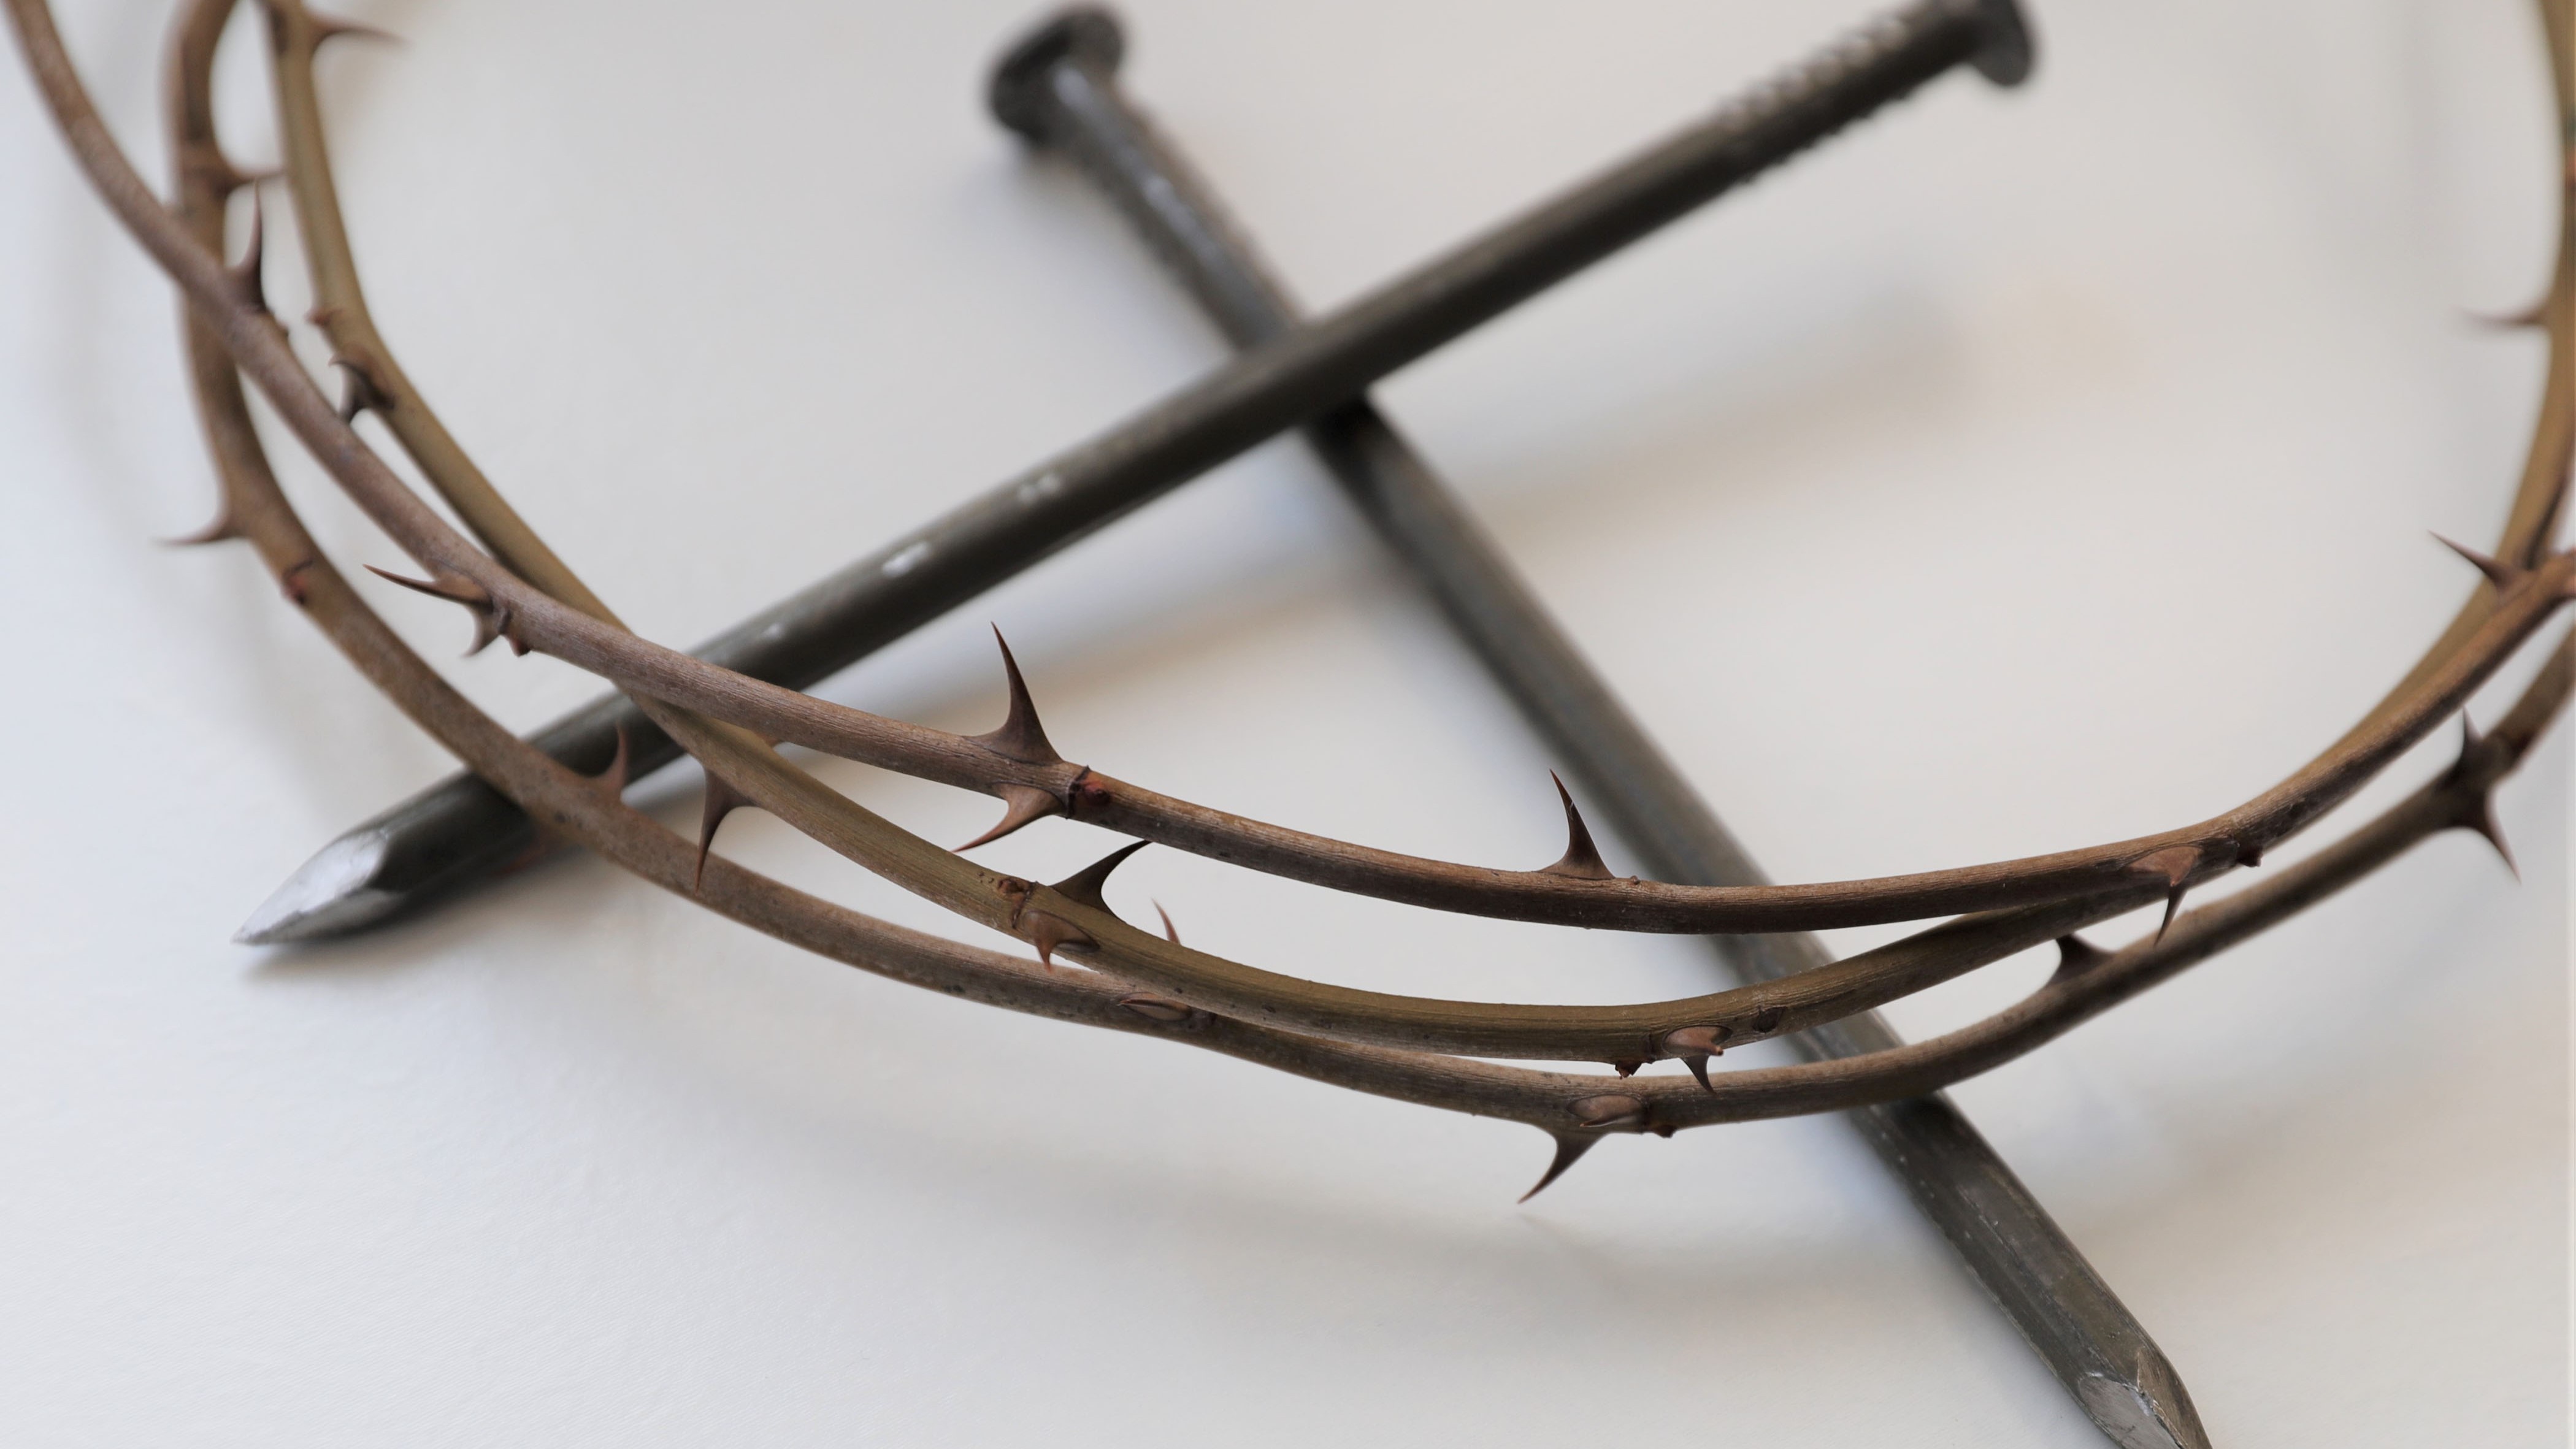 a crown of thorns resting on top of a cross made of nails on a white background